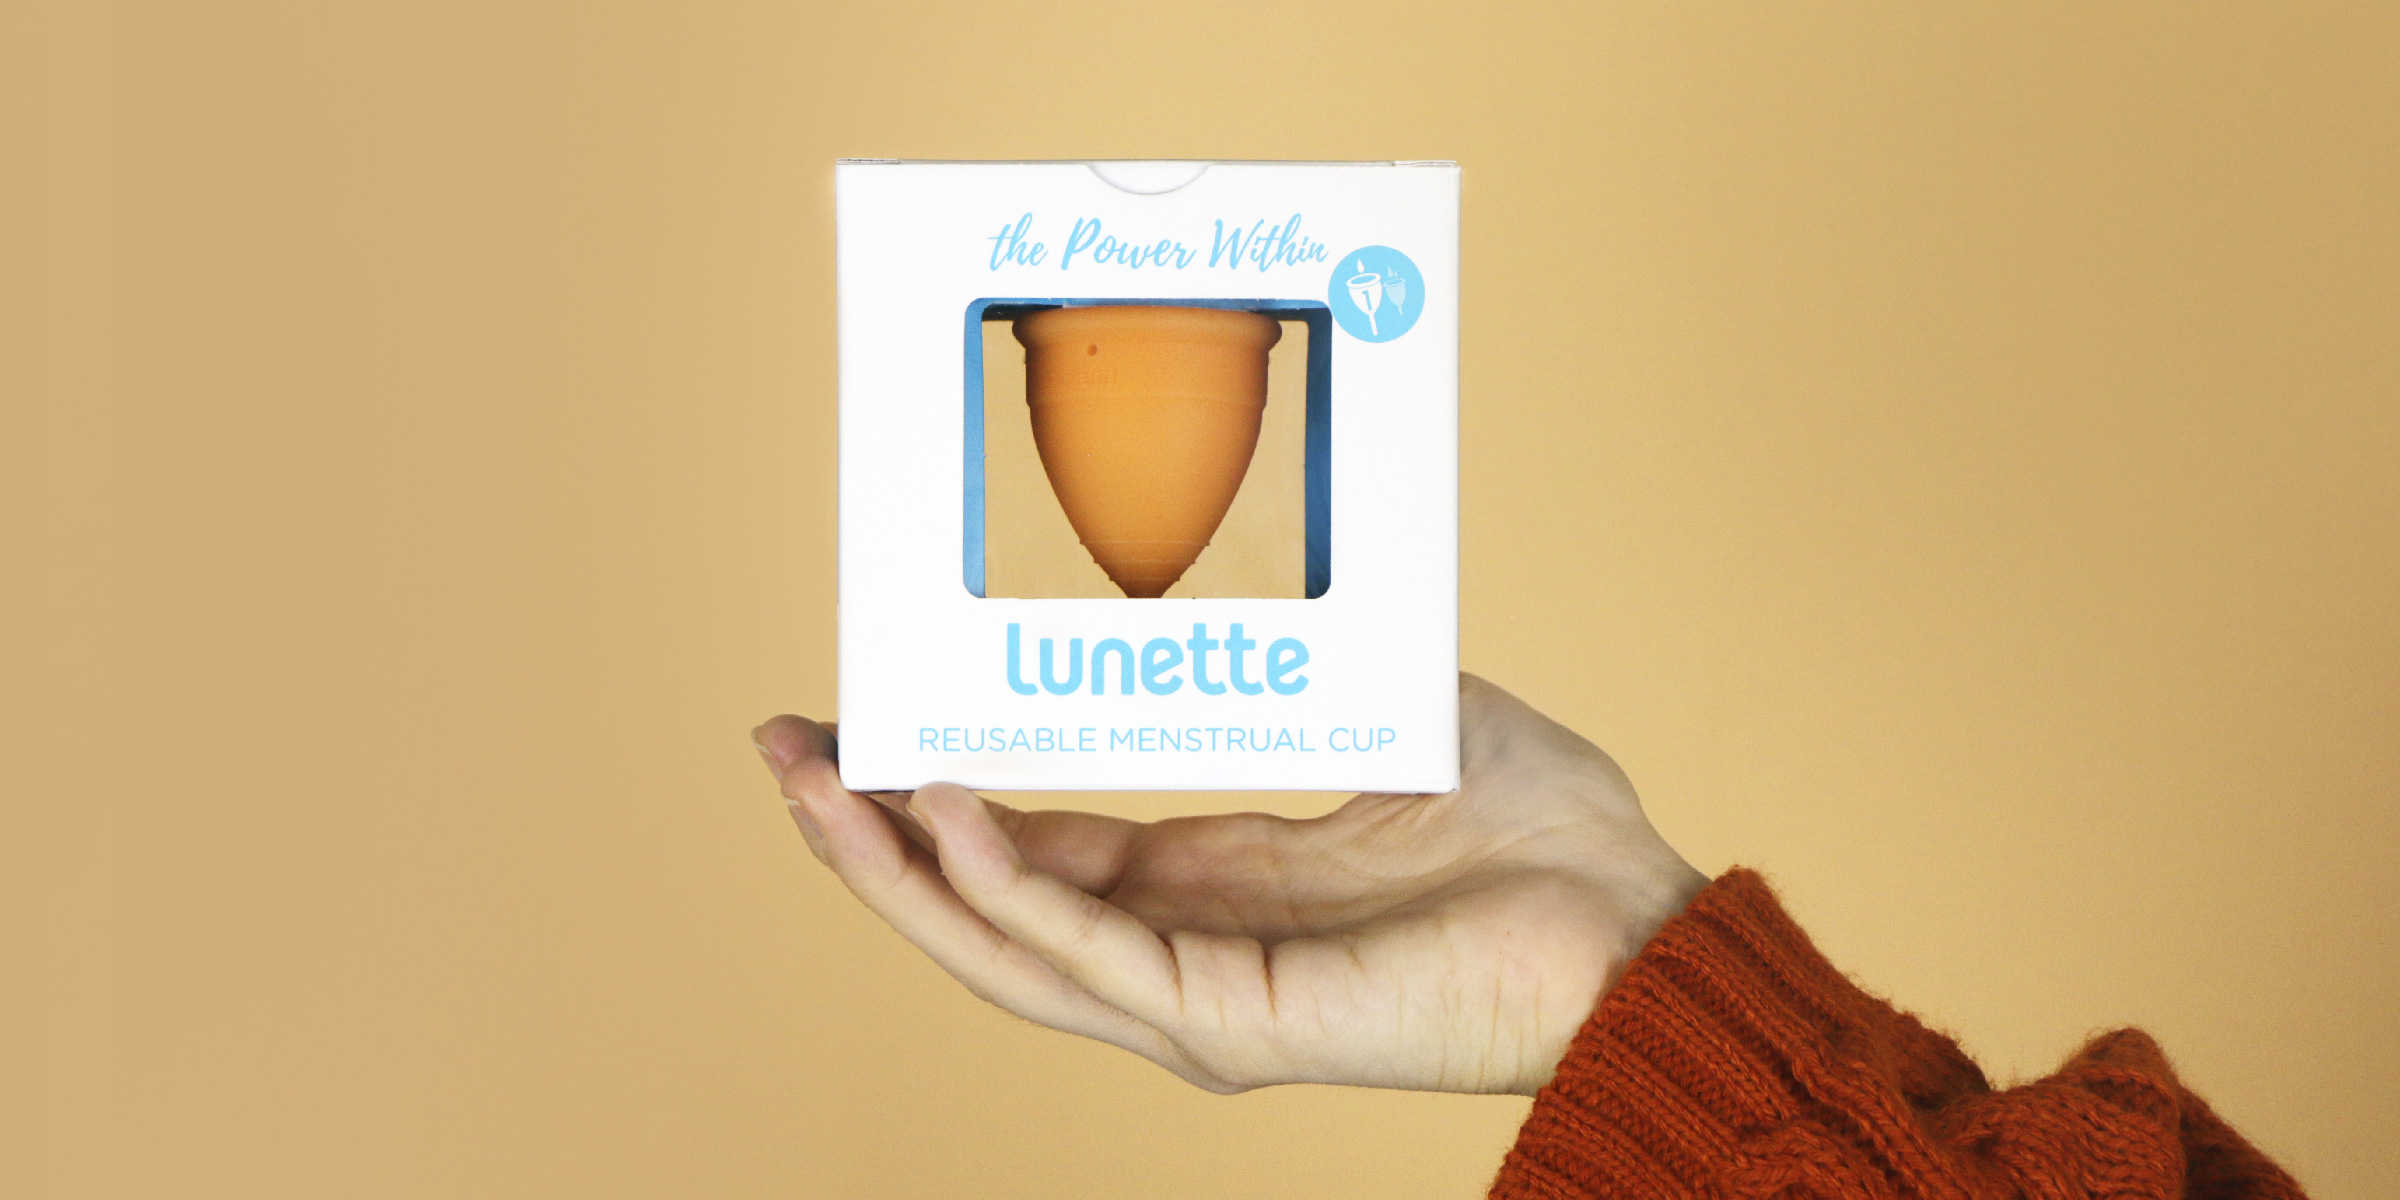 Lunette Period Cup Reviews contenful inside@2x-80